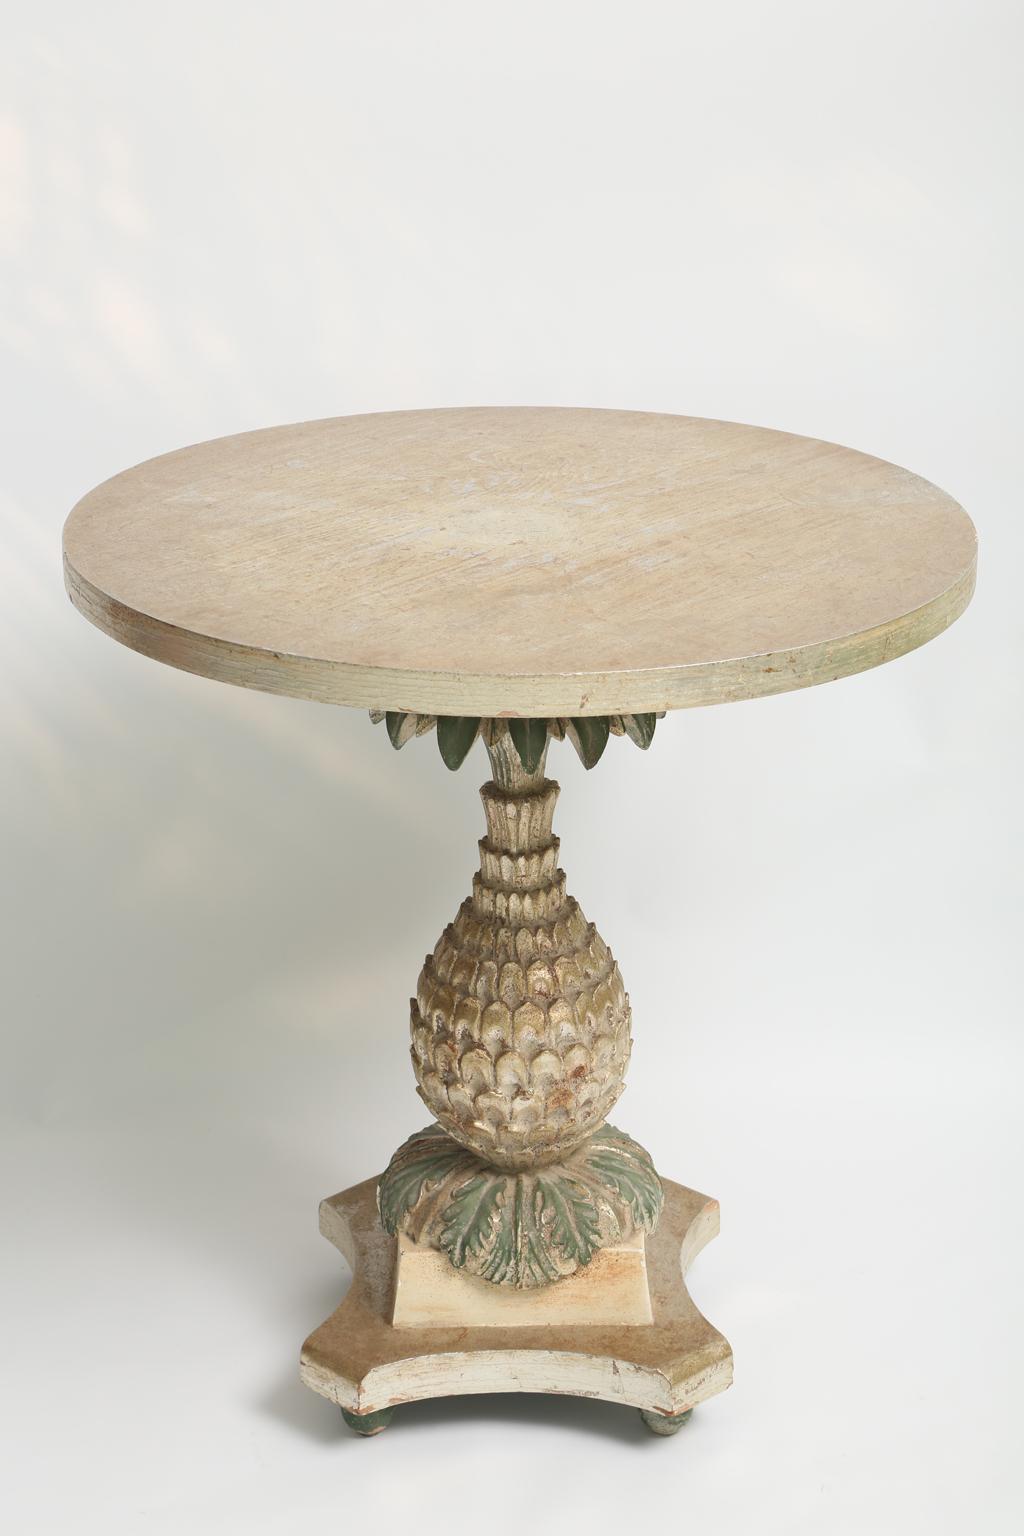 Hollywood Regency Silvergilt and Painted Italian Pineapple-Form Occasional Table